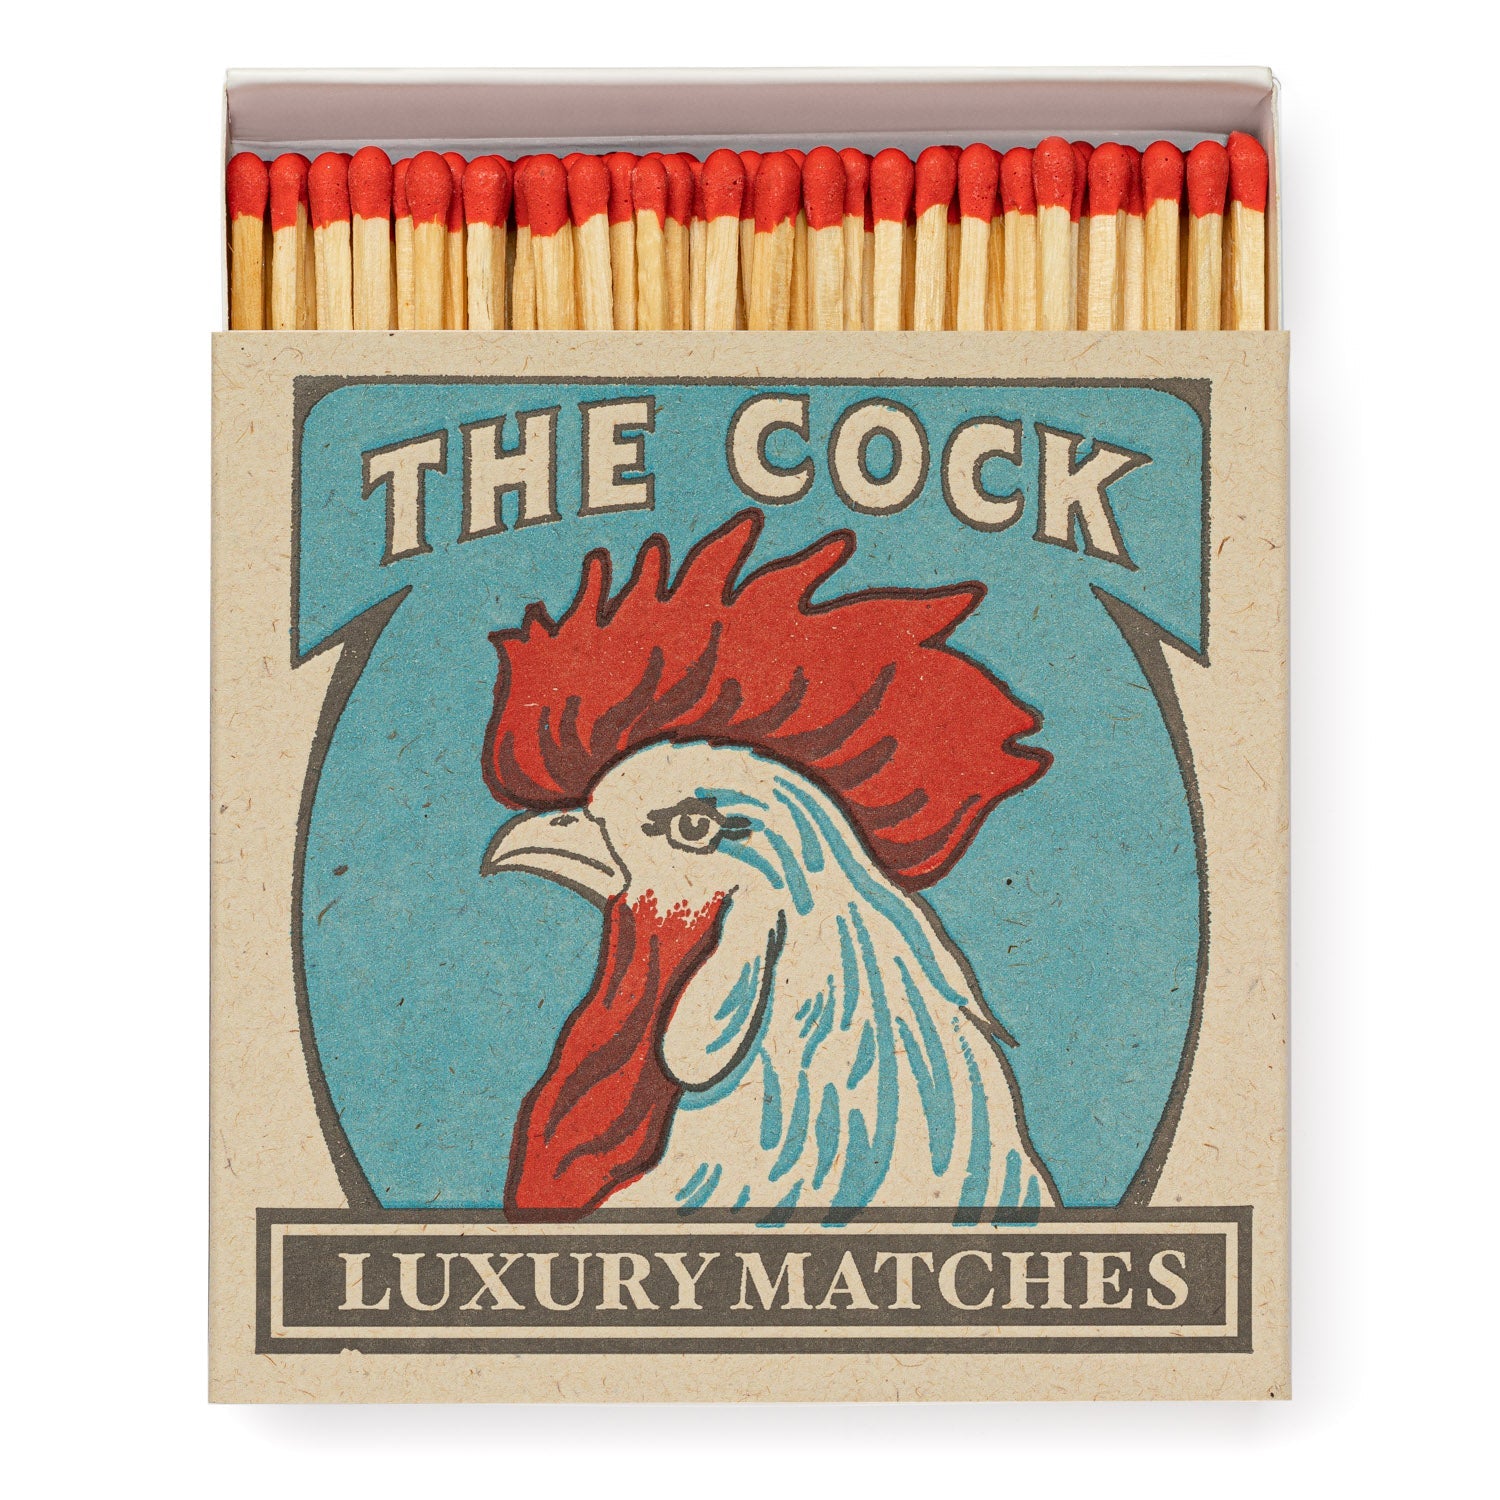 Luxury Matches - The Cock - Life of Riley